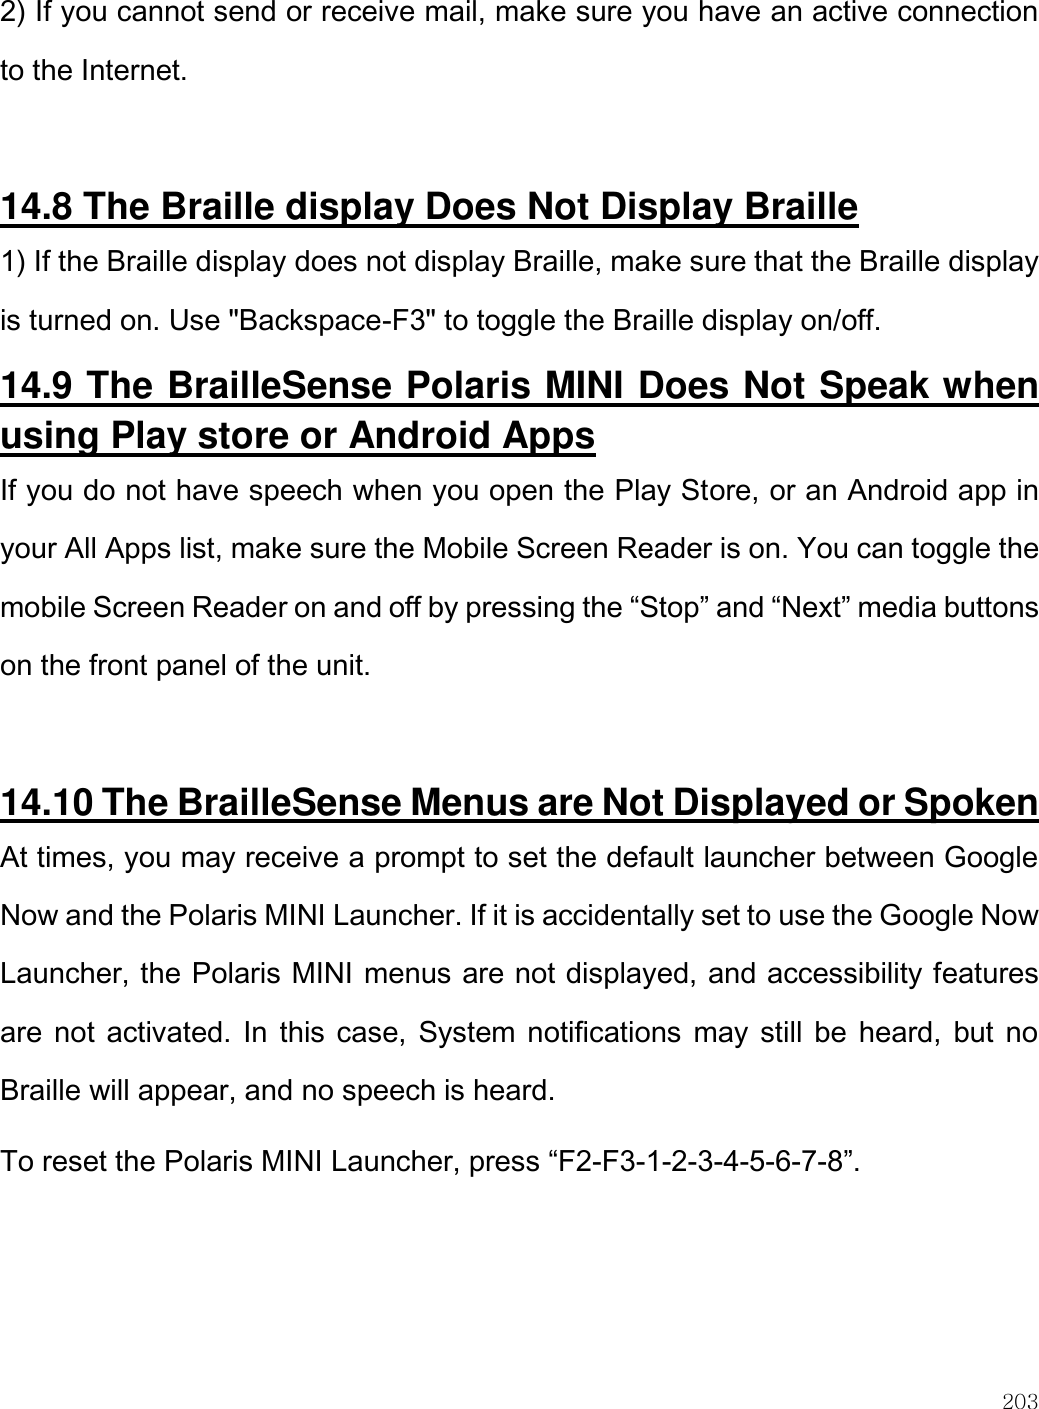    203  2) If you cannot send or receive mail, make sure you have an active connection to the Internet.  14.8 The Braille display Does Not Display Braille 1) If the Braille display does not display Braille, make sure that the Braille display is turned on. Use &quot;Backspace-F3&quot; to toggle the Braille display on/off. 14.9 The BrailleSense Polaris MINI Does Not Speak when using Play store or Android Apps If you do not have speech when you open the Play Store, or an Android app in your All Apps list, make sure the Mobile Screen Reader is on. You can toggle the mobile Screen Reader on and off by pressing the “Stop” and “Next” media buttons on the front panel of the unit.   14.10 The BrailleSense Menus are Not Displayed or Spoken At times, you may receive a prompt to set the default launcher between Google Now and the Polaris MINI Launcher. If it is accidentally set to use the Google Now Launcher, the Polaris MINI menus are not displayed, and accessibility features are not activated. In this case, System notifications may still be heard, but no Braille will appear, and no speech is heard. To reset the Polaris MINI Launcher, press “F2-F3-1-2-3-4-5-6-7-8”.   